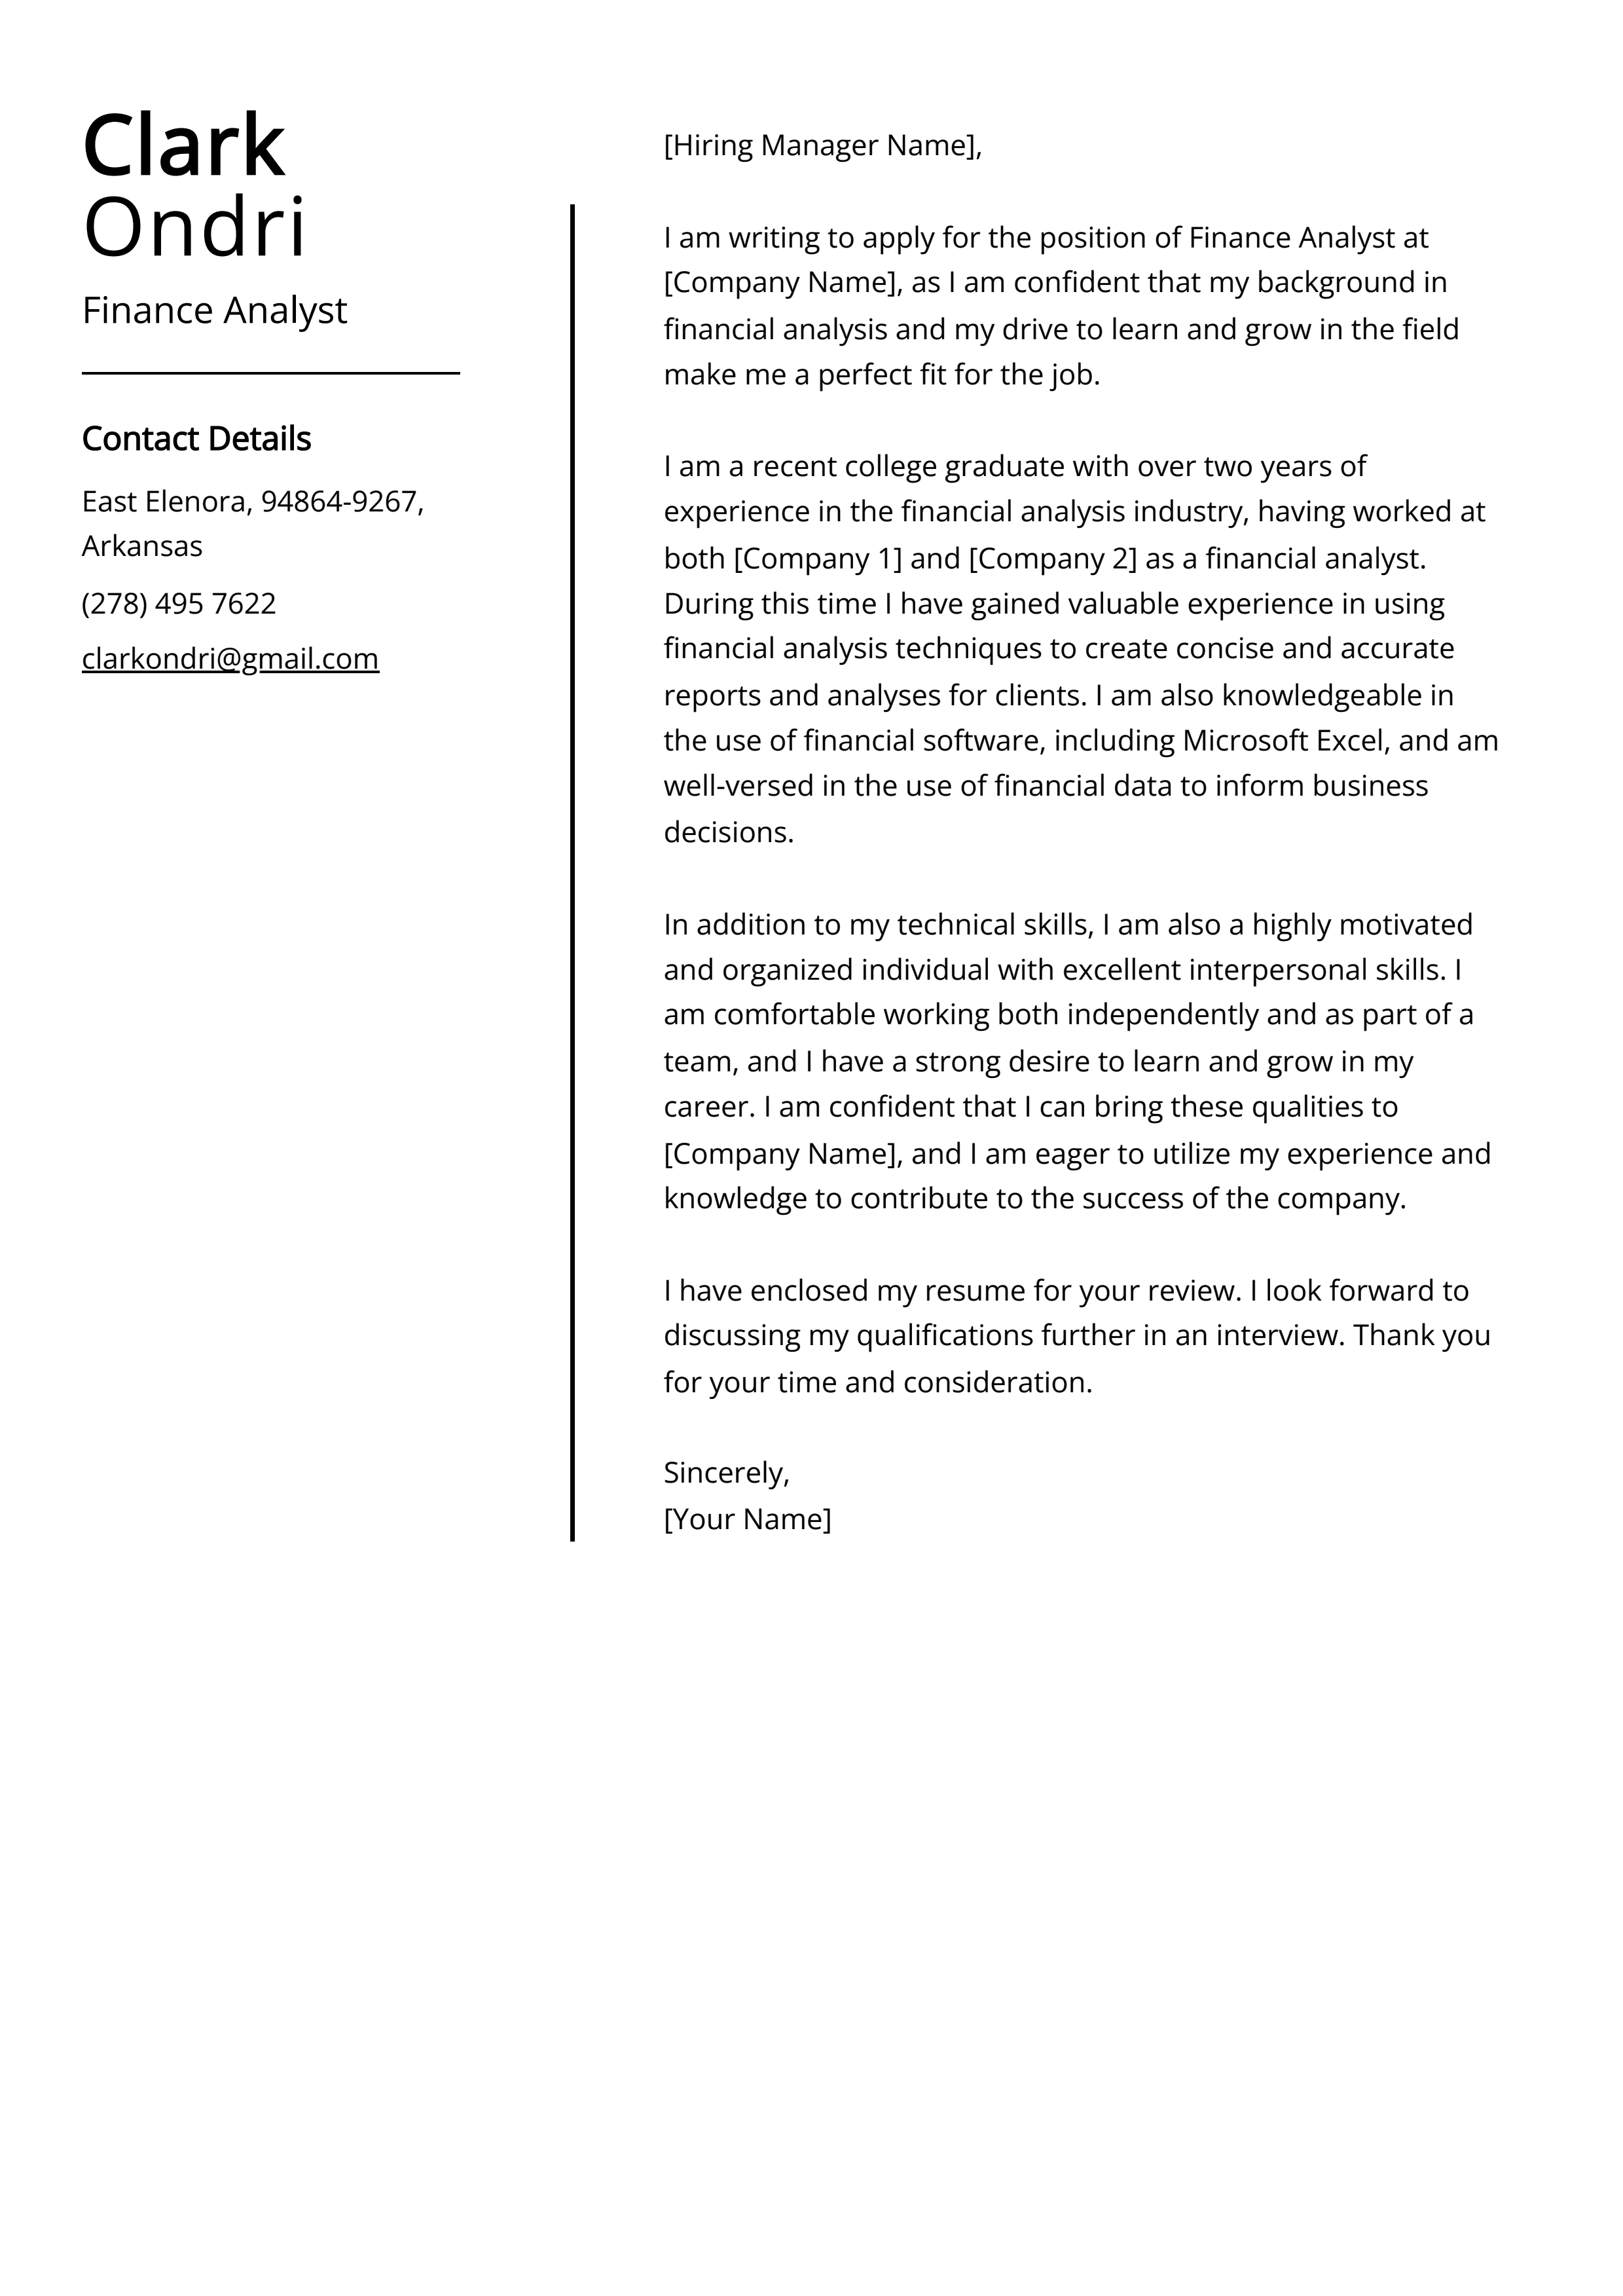 Finance Analyst Cover Letter Example